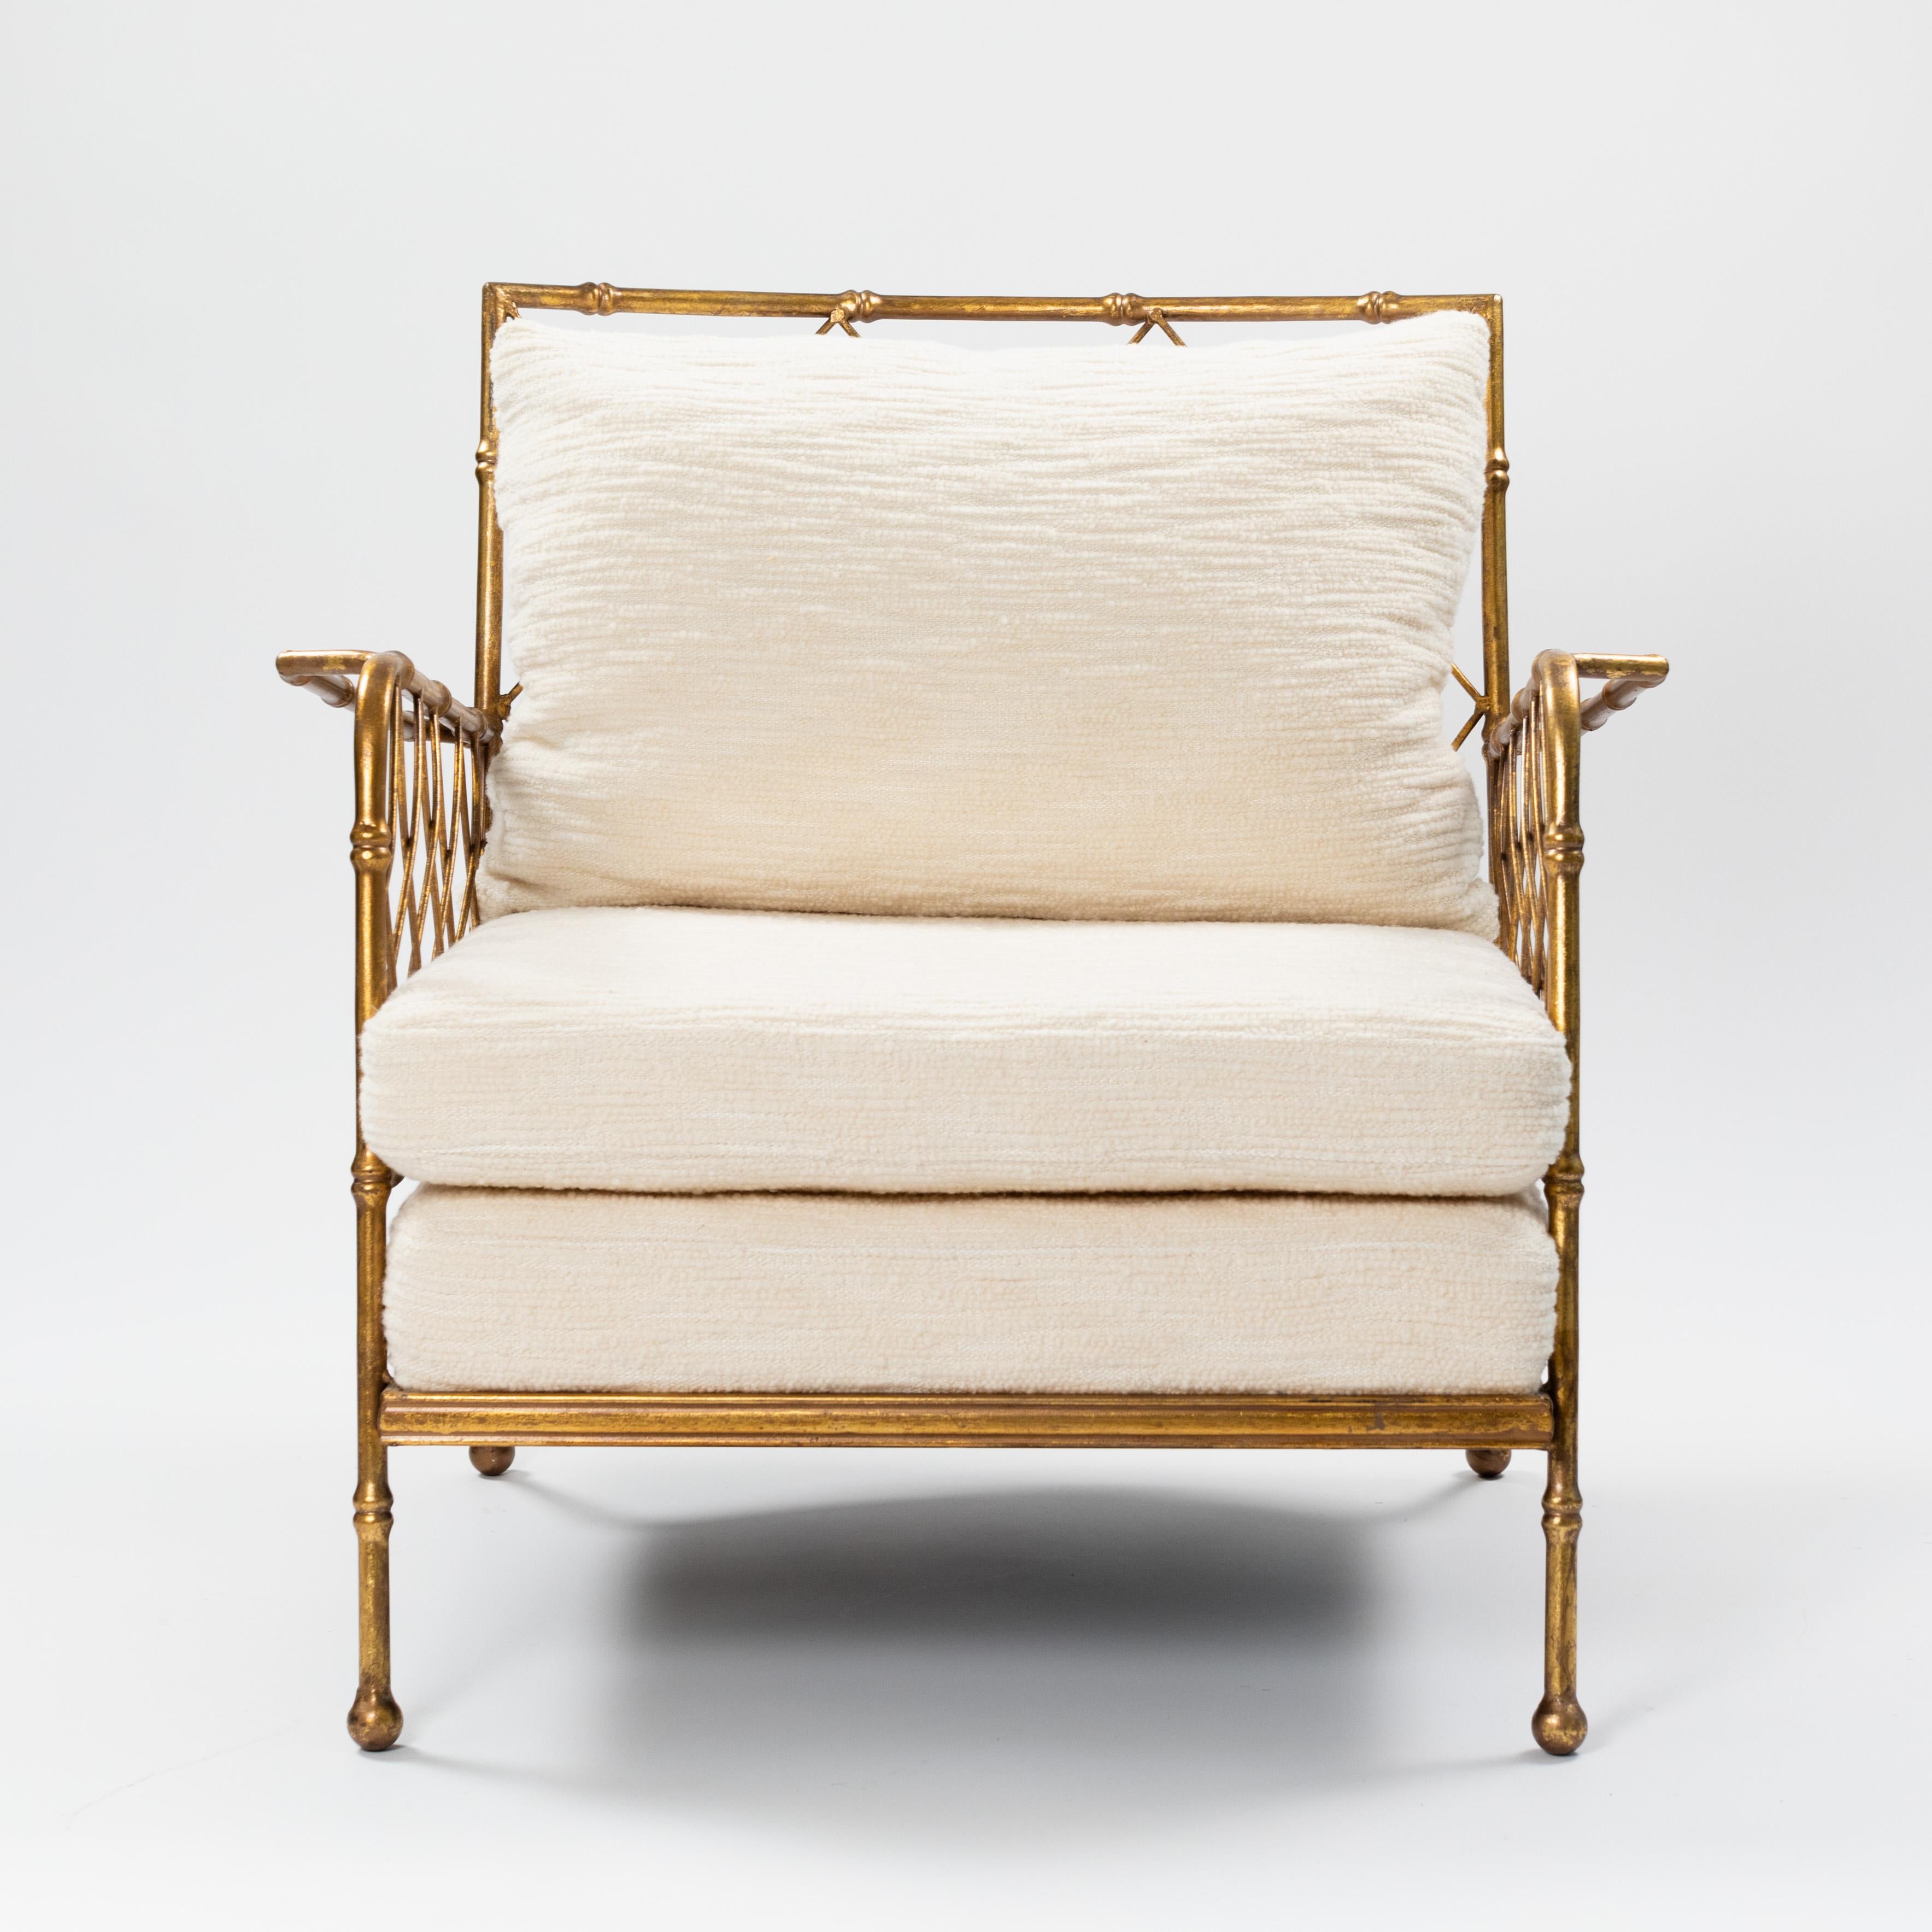 Light-footed and stylish armchairs in bamboo design.
The sides and the back are decorated with a large weave, the frame parts have a bamboo structure, 
the frame has a ribbed profile.
The seat and back cushions have been renewed with an offwhite